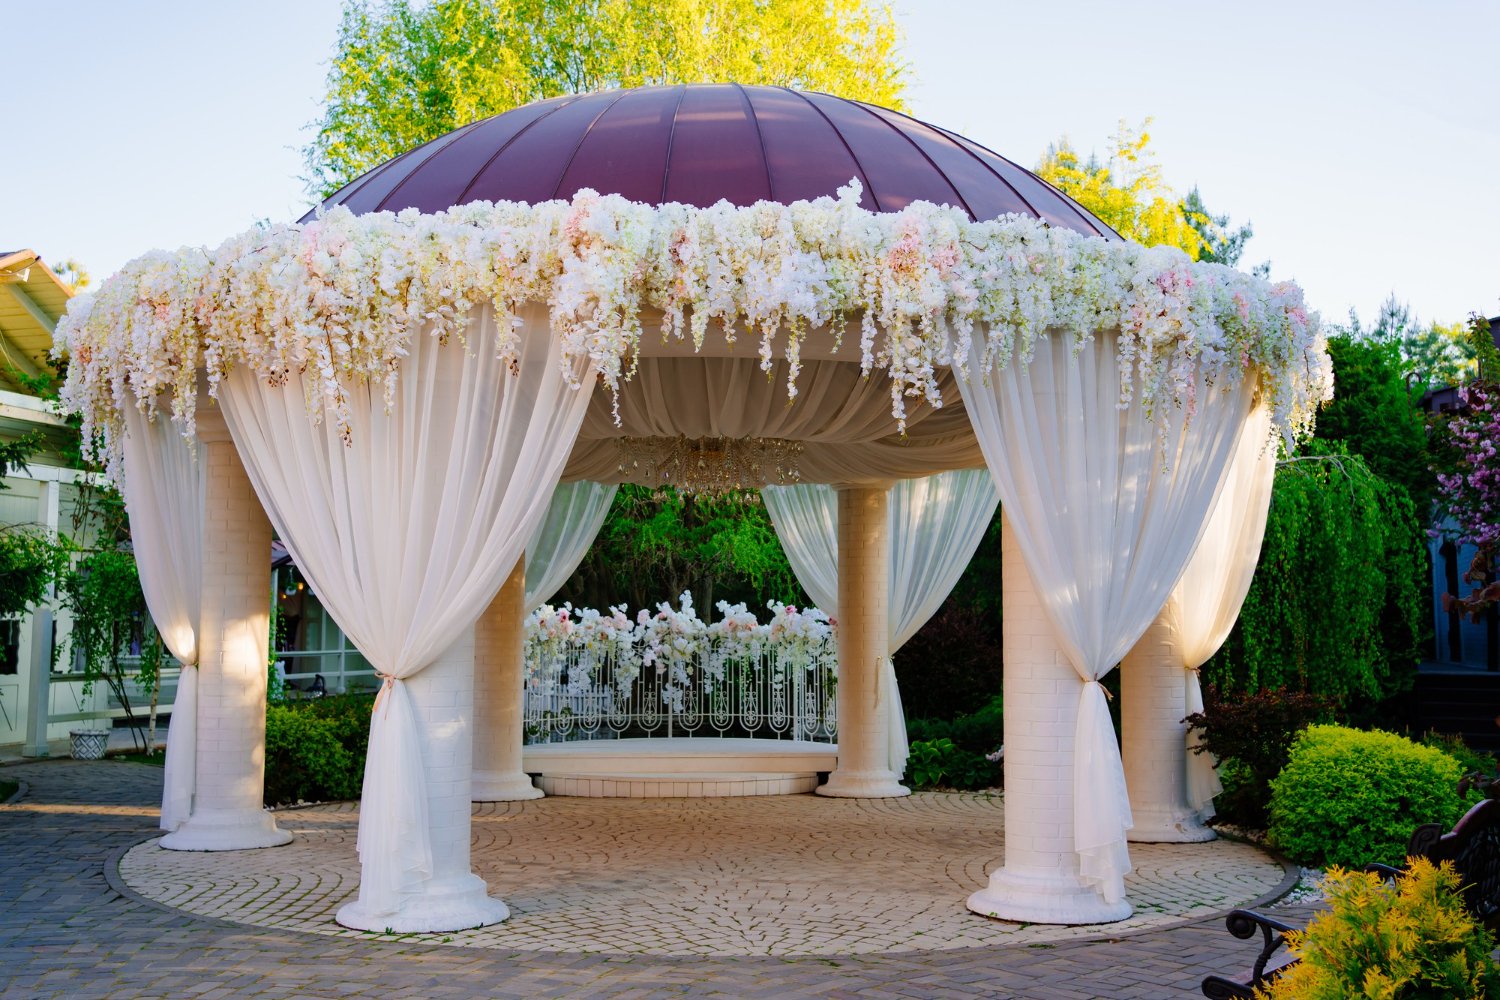 rotunda for a wedding in the park or in the garden. decoration of gazebos and arches